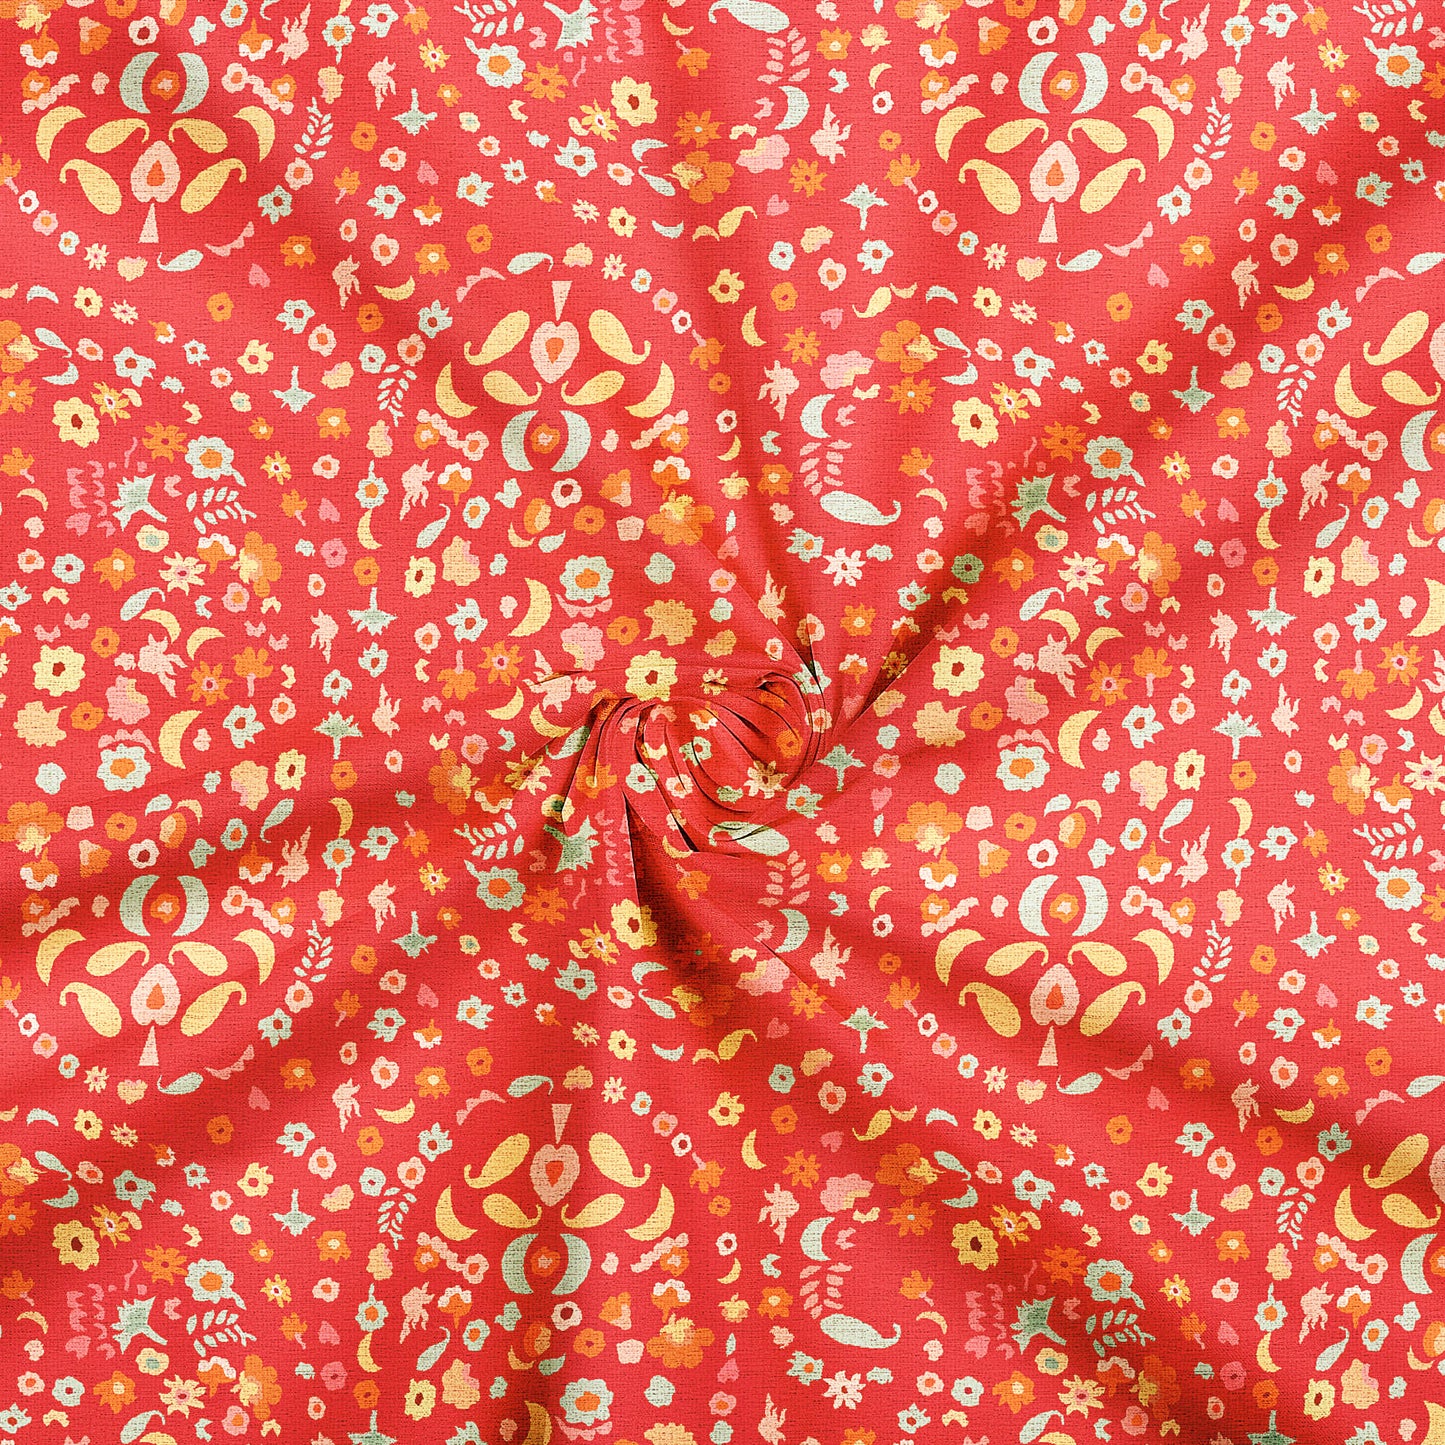 Apurva's Choice Red And Turquoise Paisley Pattern Digital Print Georgette Fabric